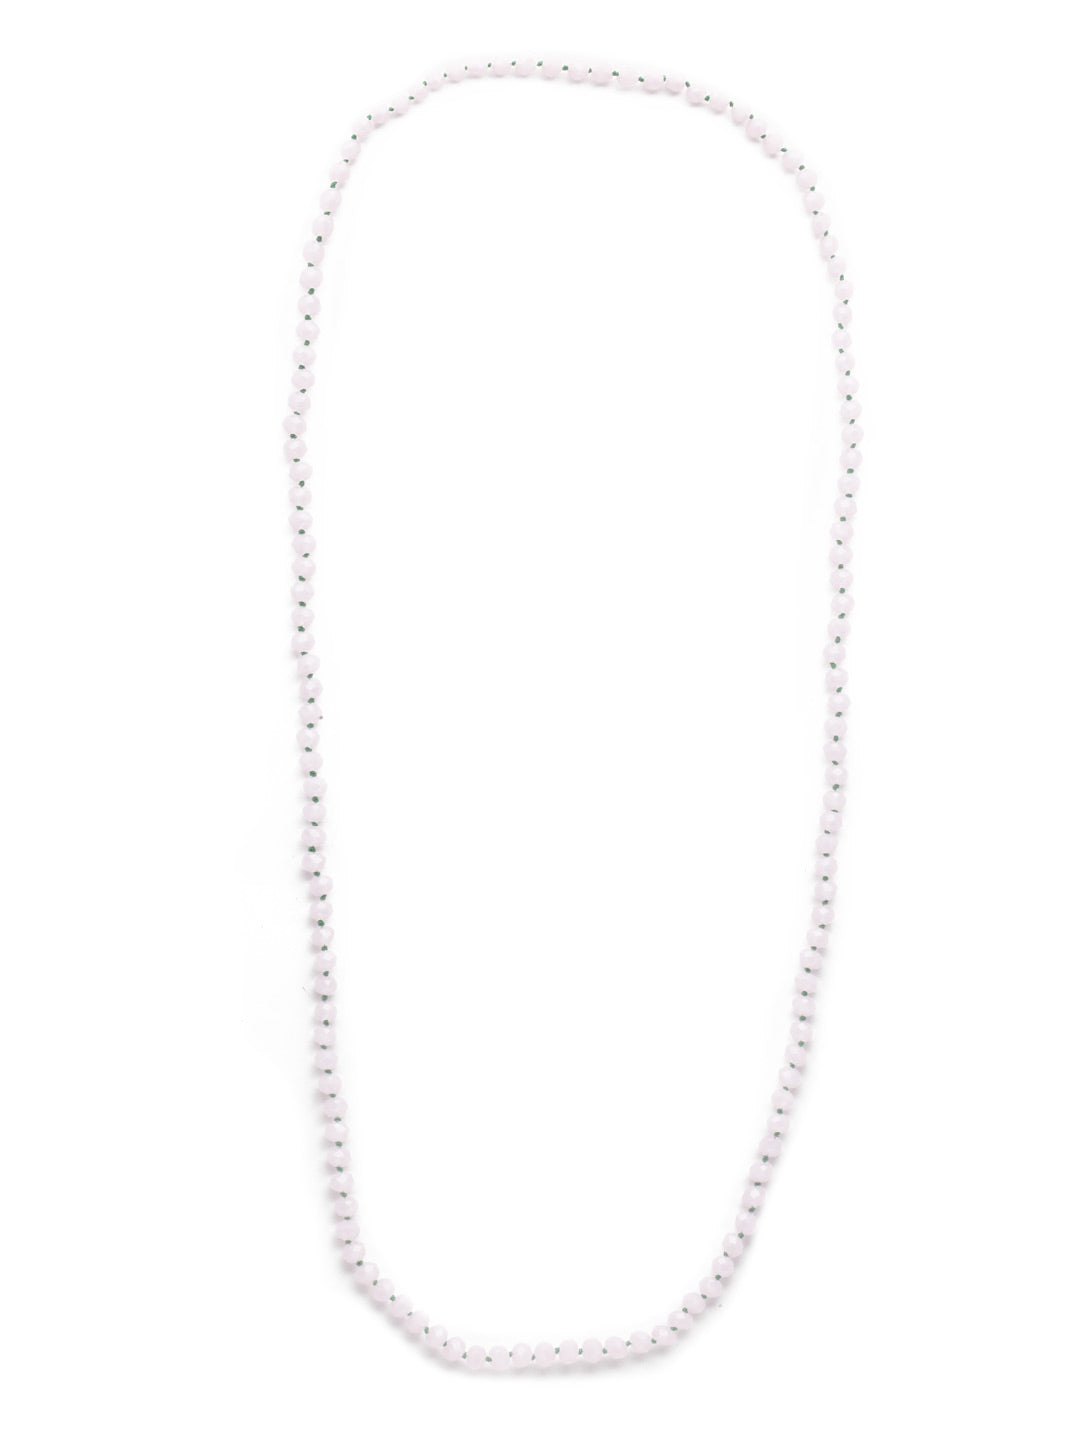 Sandra Long Necklace - NEV43BGSPR - <p>Clearly beautiful. That's our Sandra Long Necklace. The light strand showcases its pure clear beadwork perfectly. This is a piece you'll wear time and time again. From Sorrelli's Spring Rain collection in our Bright Gold-tone finish.</p>